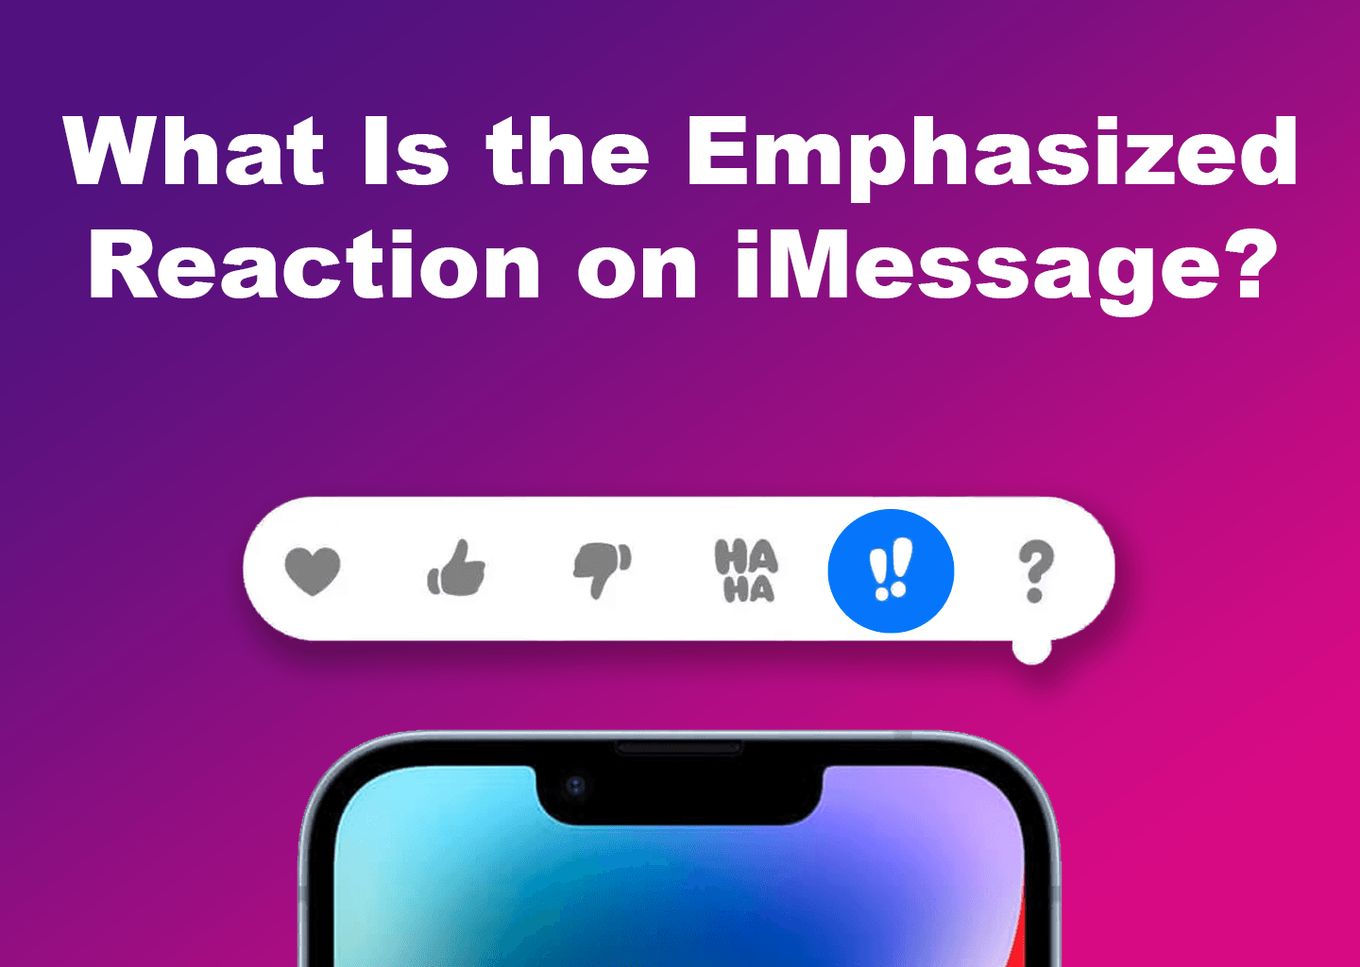 What Is the Emphasized Reaction on iMessage?